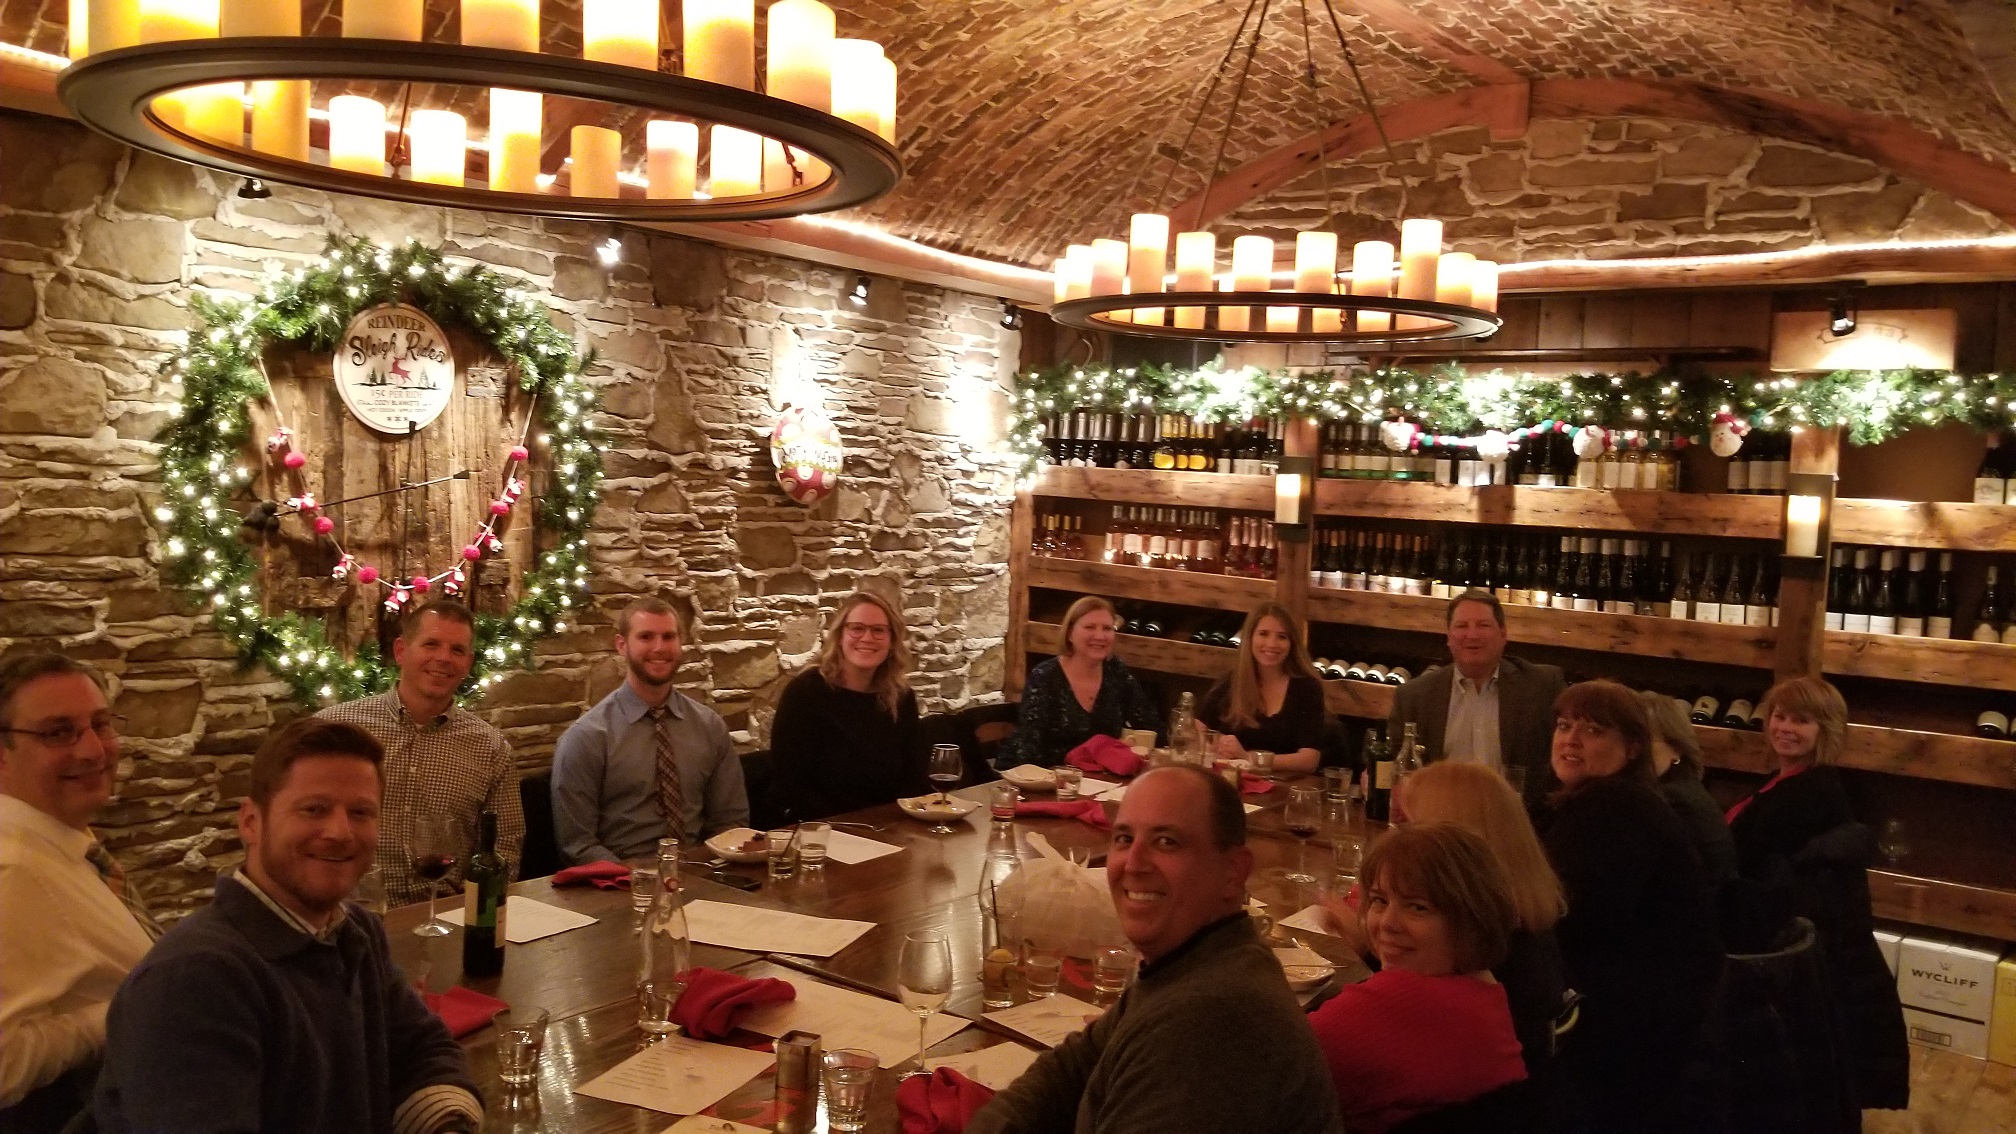 The whole IMC team had a great time celebrating its 2019 Holiday Party at Davanti Enoteca!